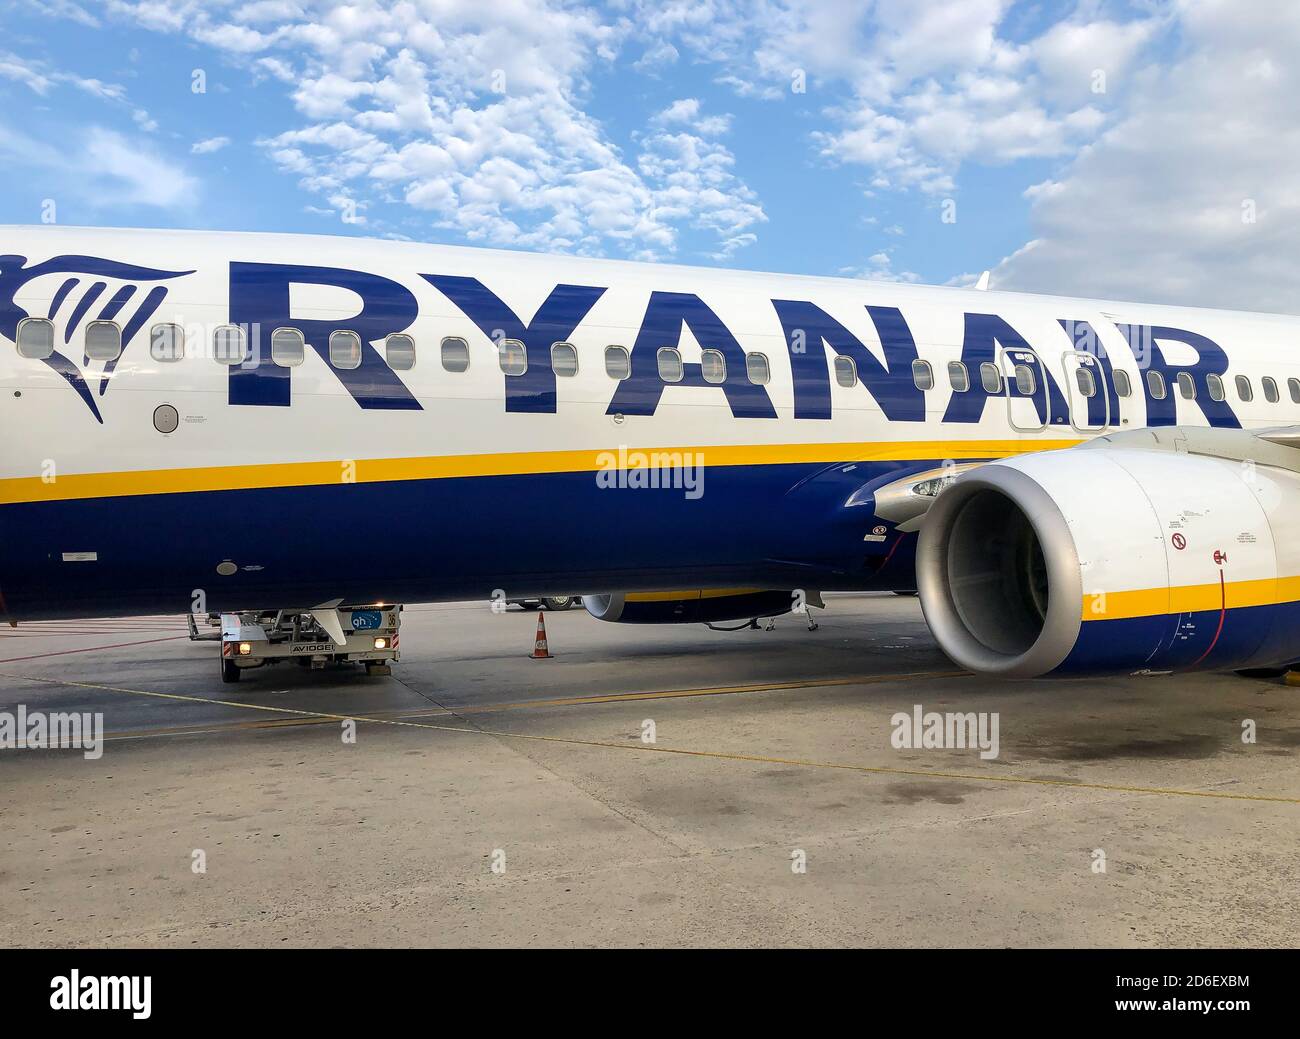 Palermo, Italy - September 23, 2020: Boeing Aircraft of low cost airline company Ryanair in the Palermo Falcone Borsellino Airport, Punta Raisi, Sicil Stock Photo